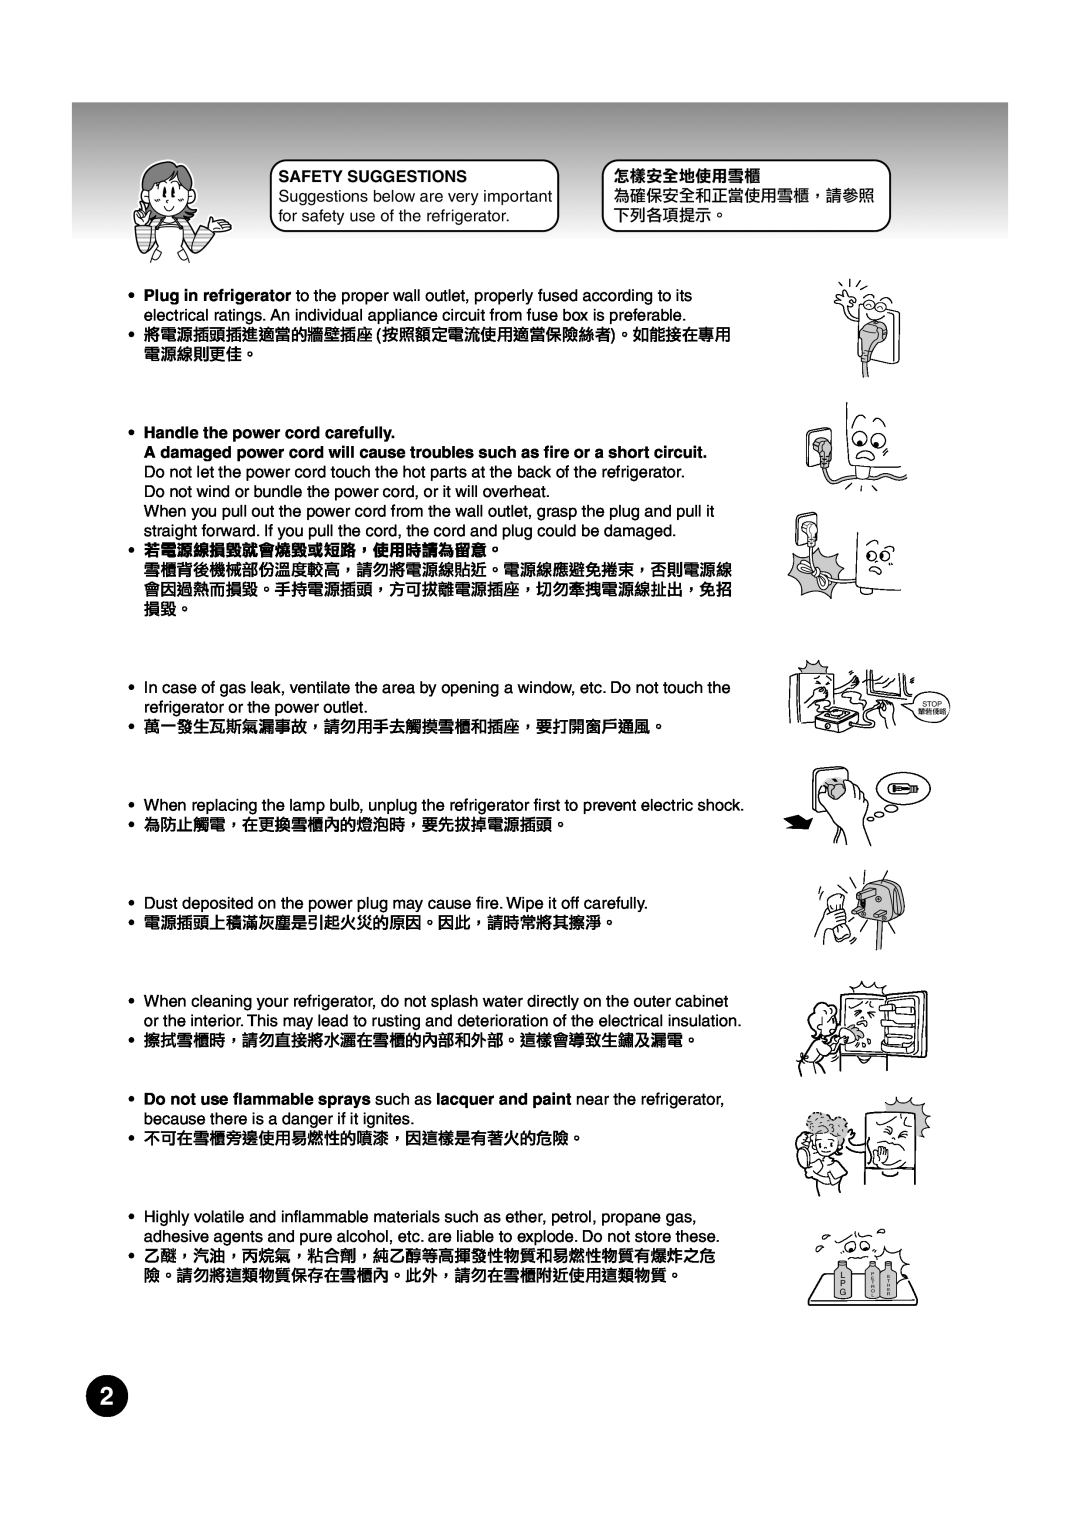 Hitachi refrigerator-freezer Safety Suggestions, Suggestions below are very important, for safety use of the refrigerator 